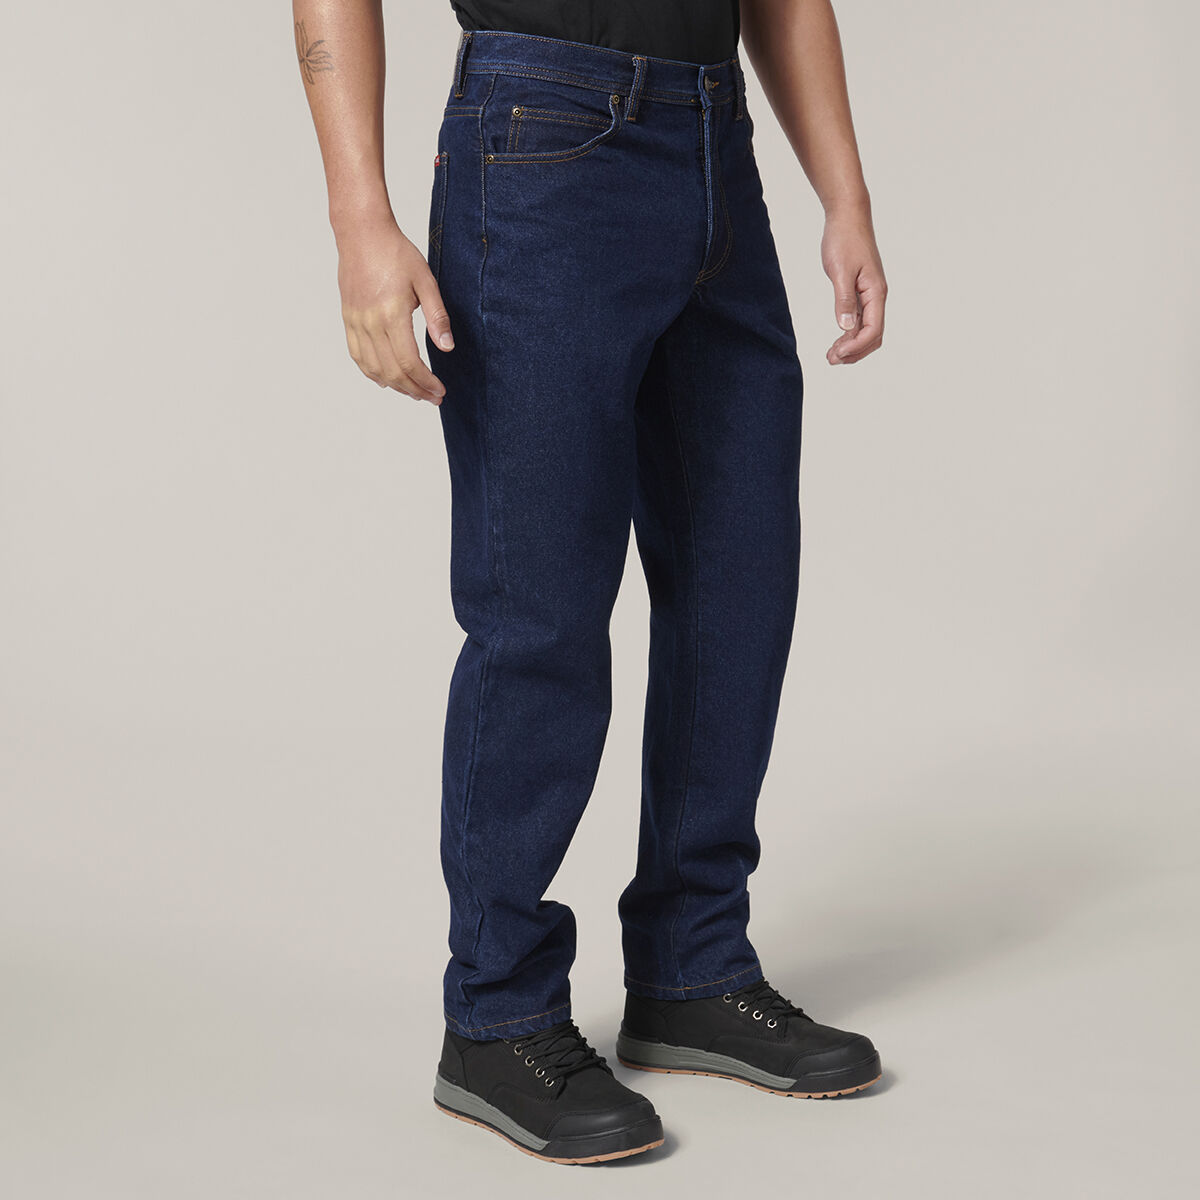 ORIGIN™ WORK JEANS - RELAXED